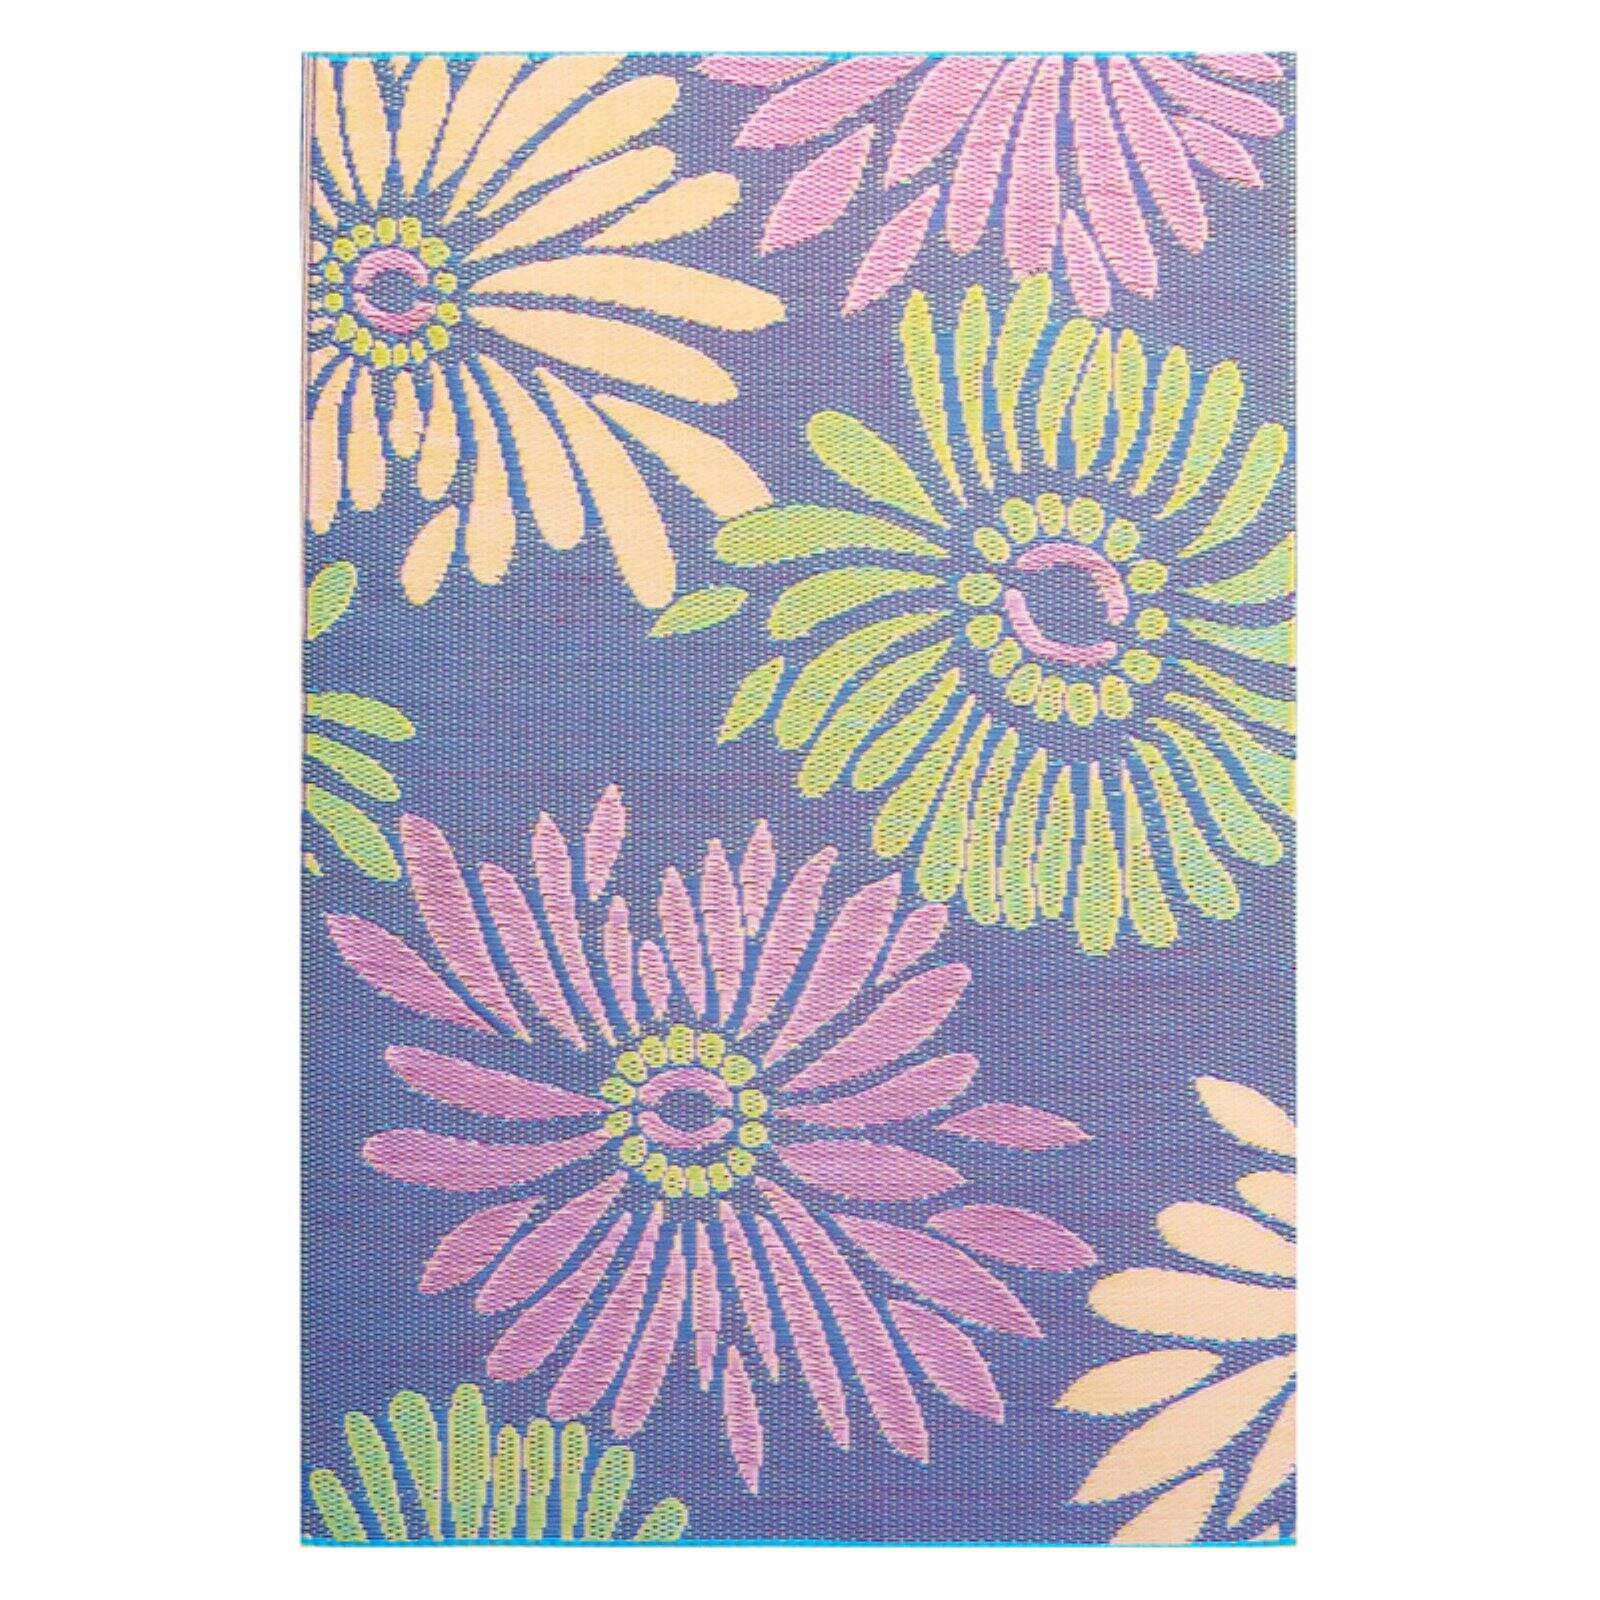 Mad Mats Daisy Outdoor Area Rug - image 1 of 4